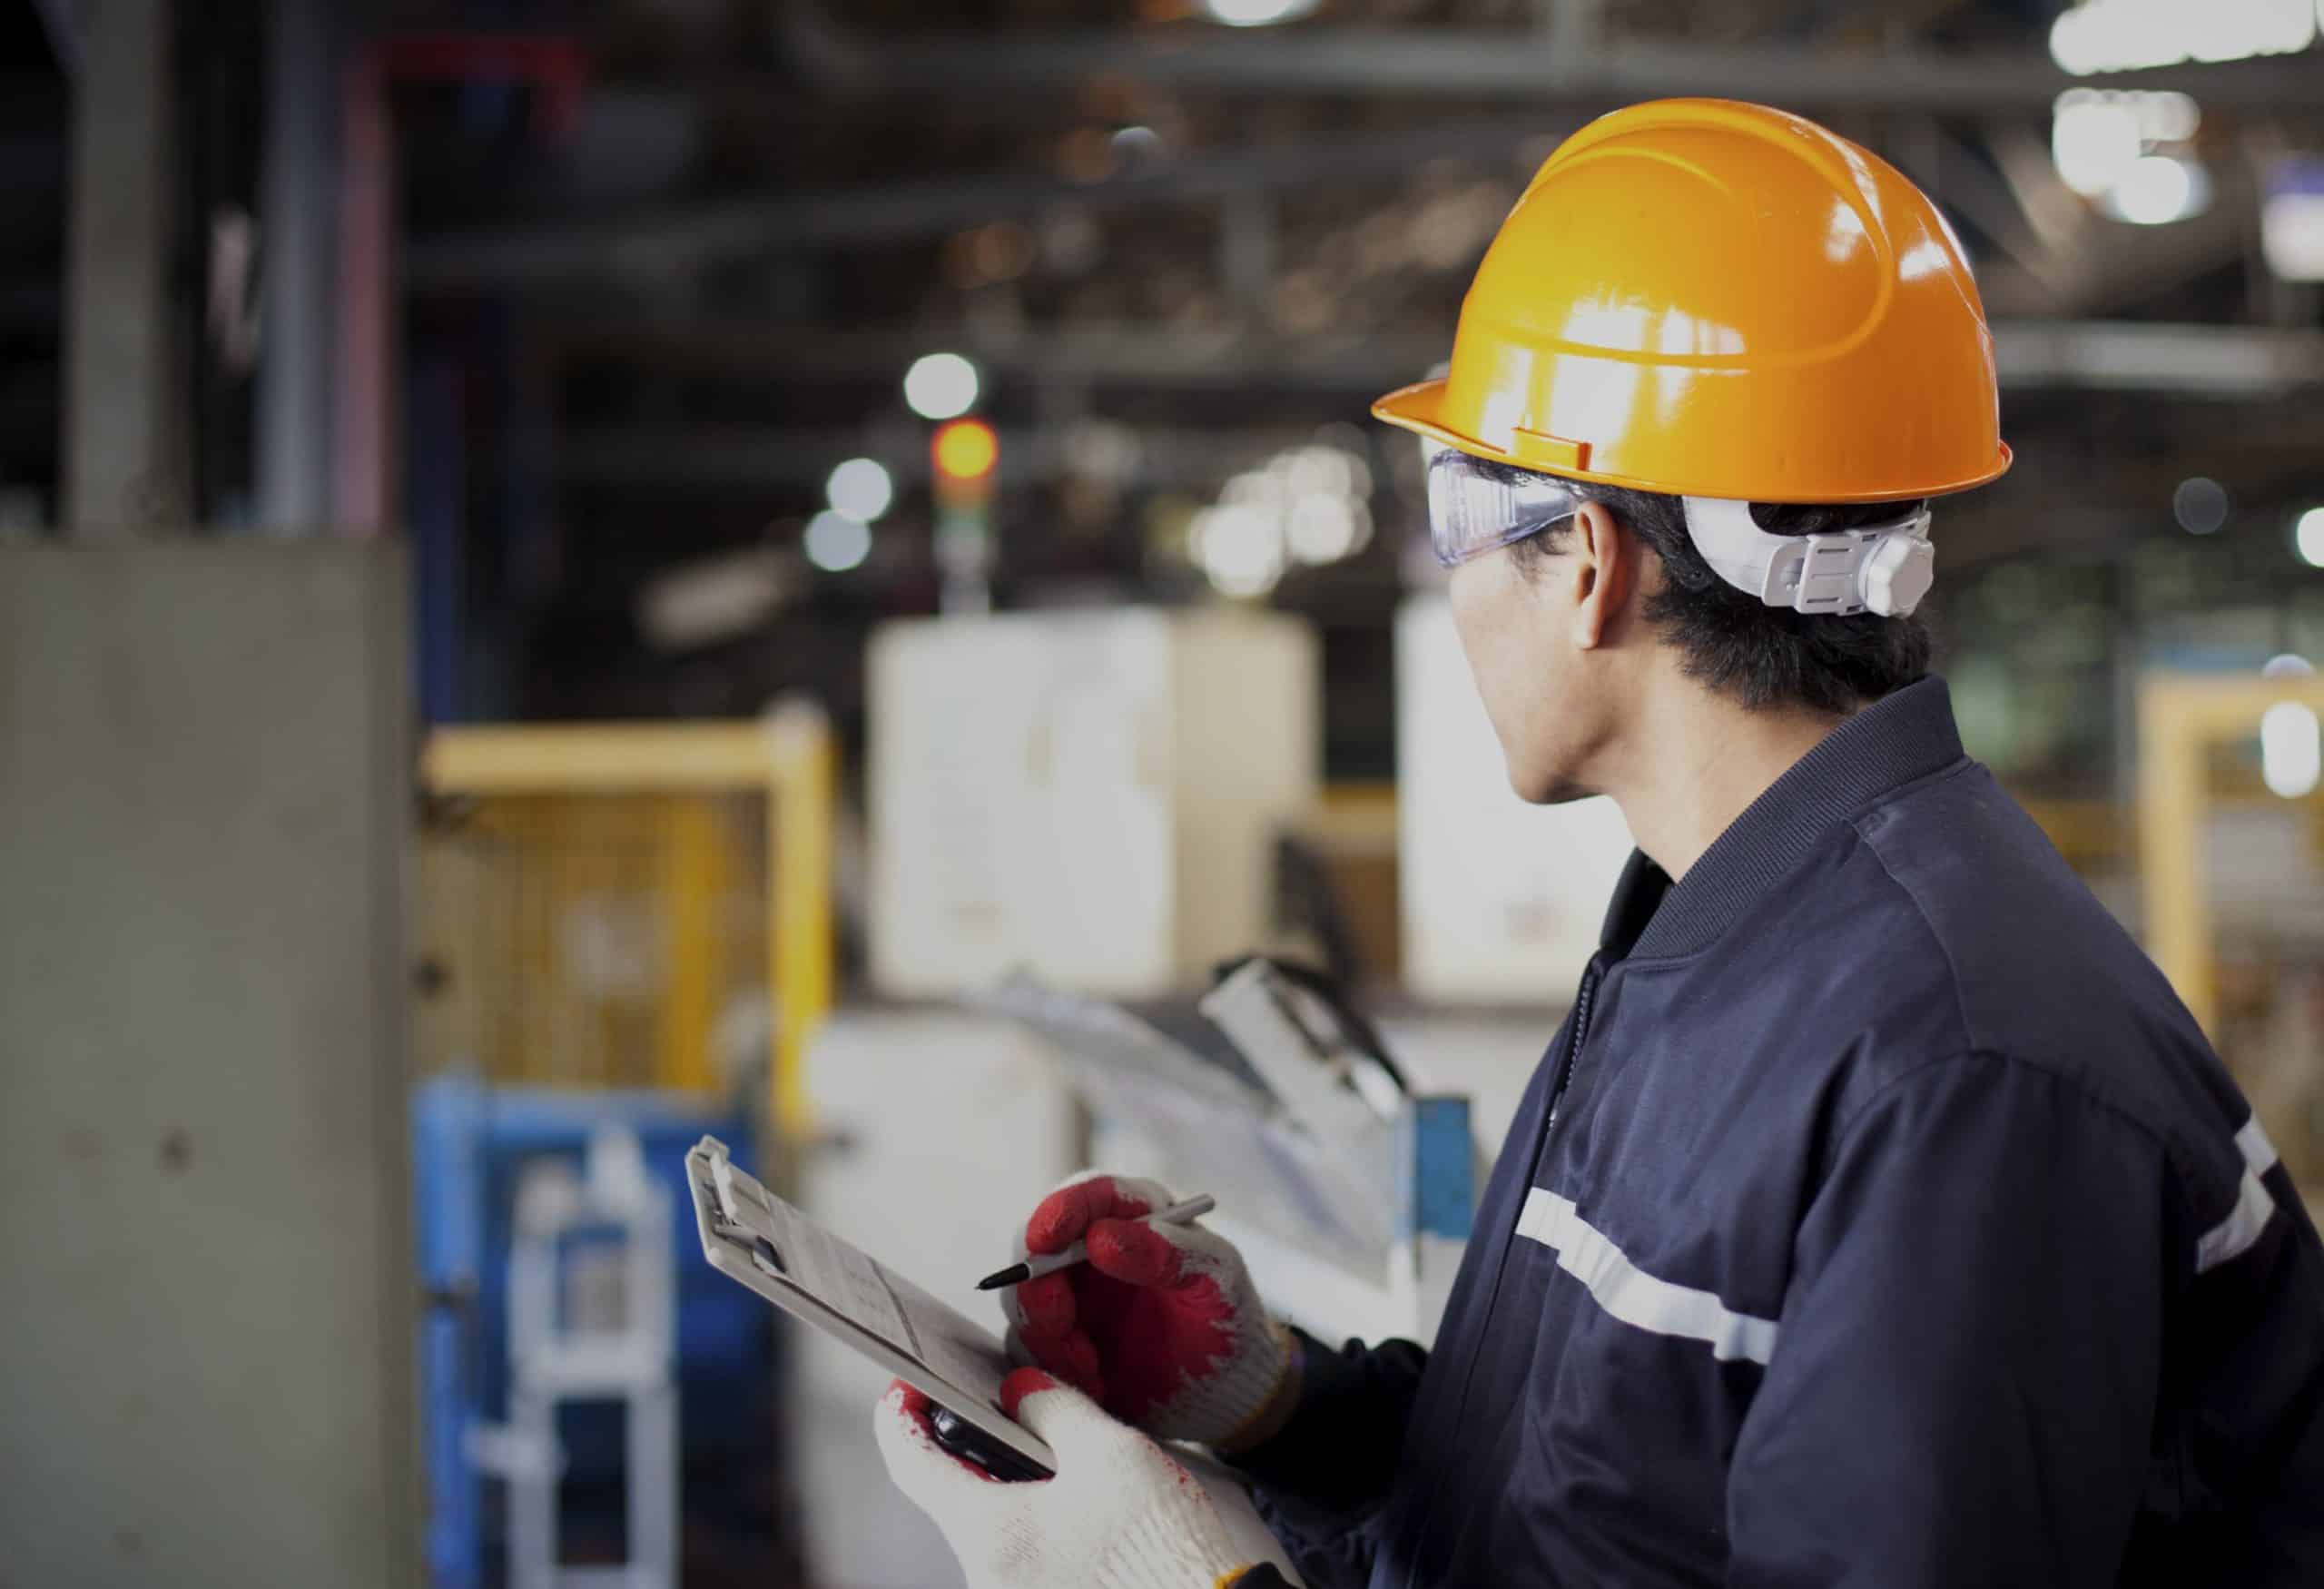 Warehouse Safety Checklist: 8 Things Every Manager Should Review